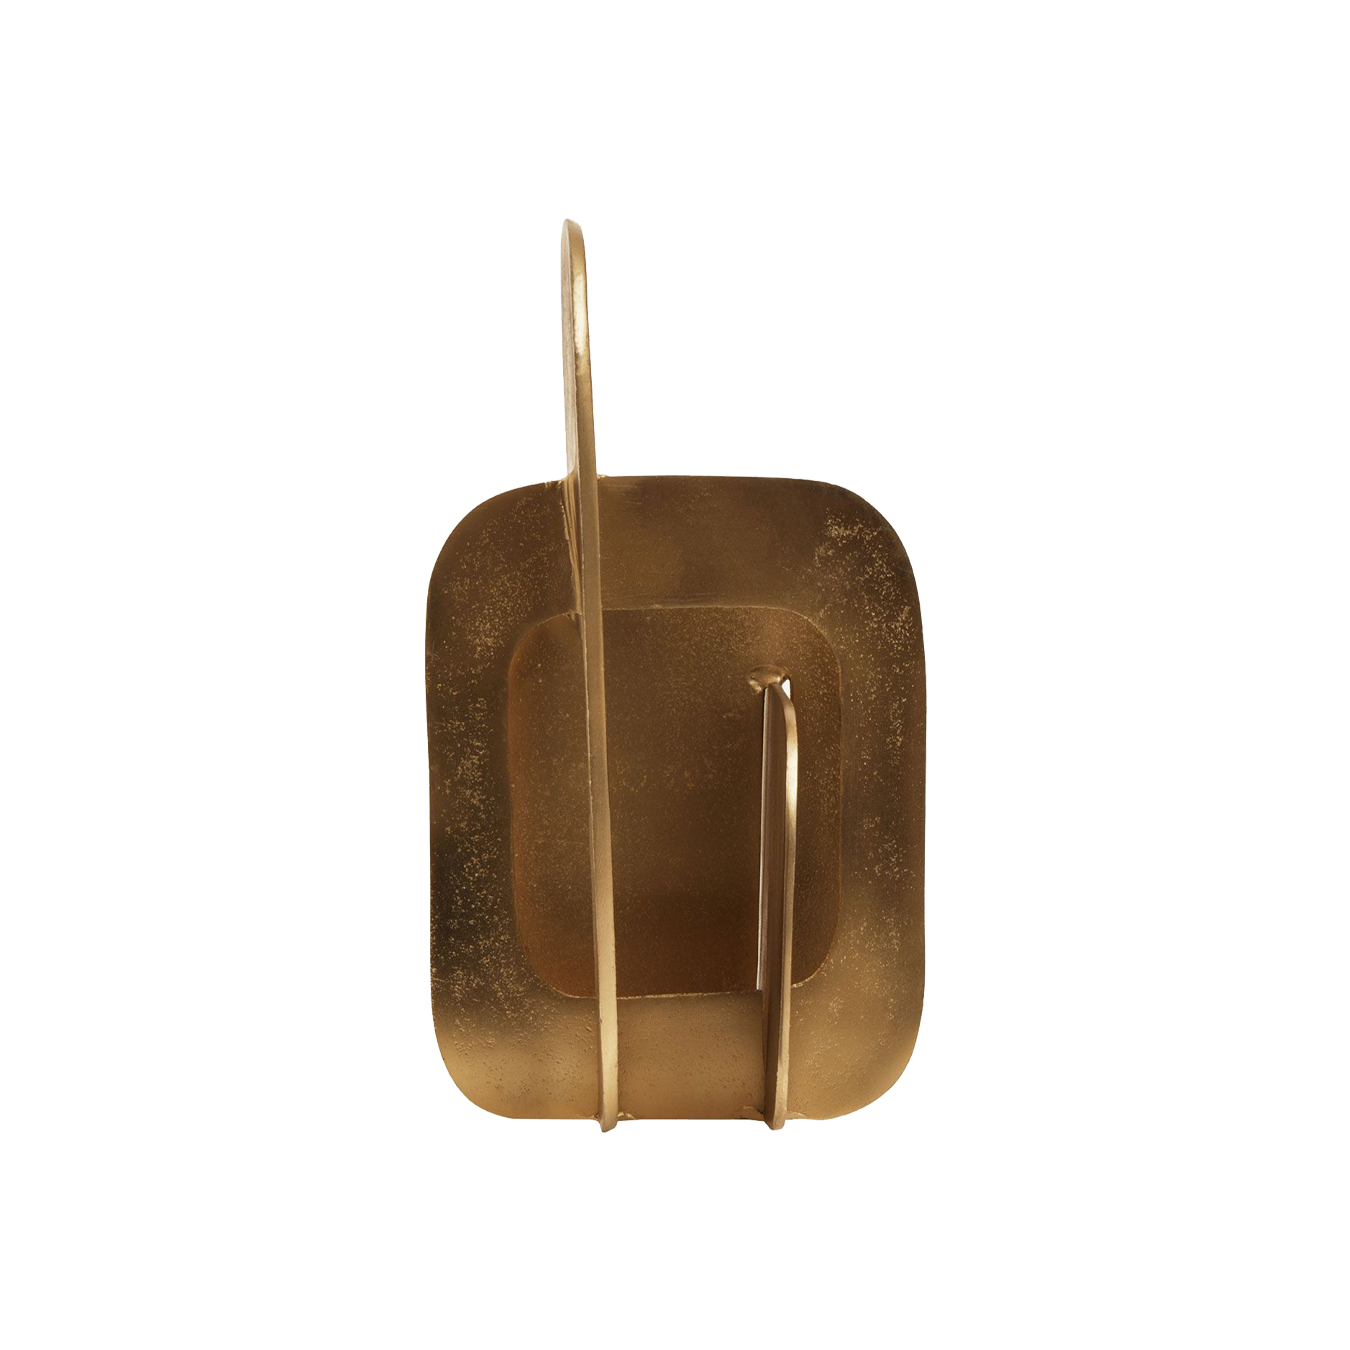 Prato Abstract Gold Sculpture